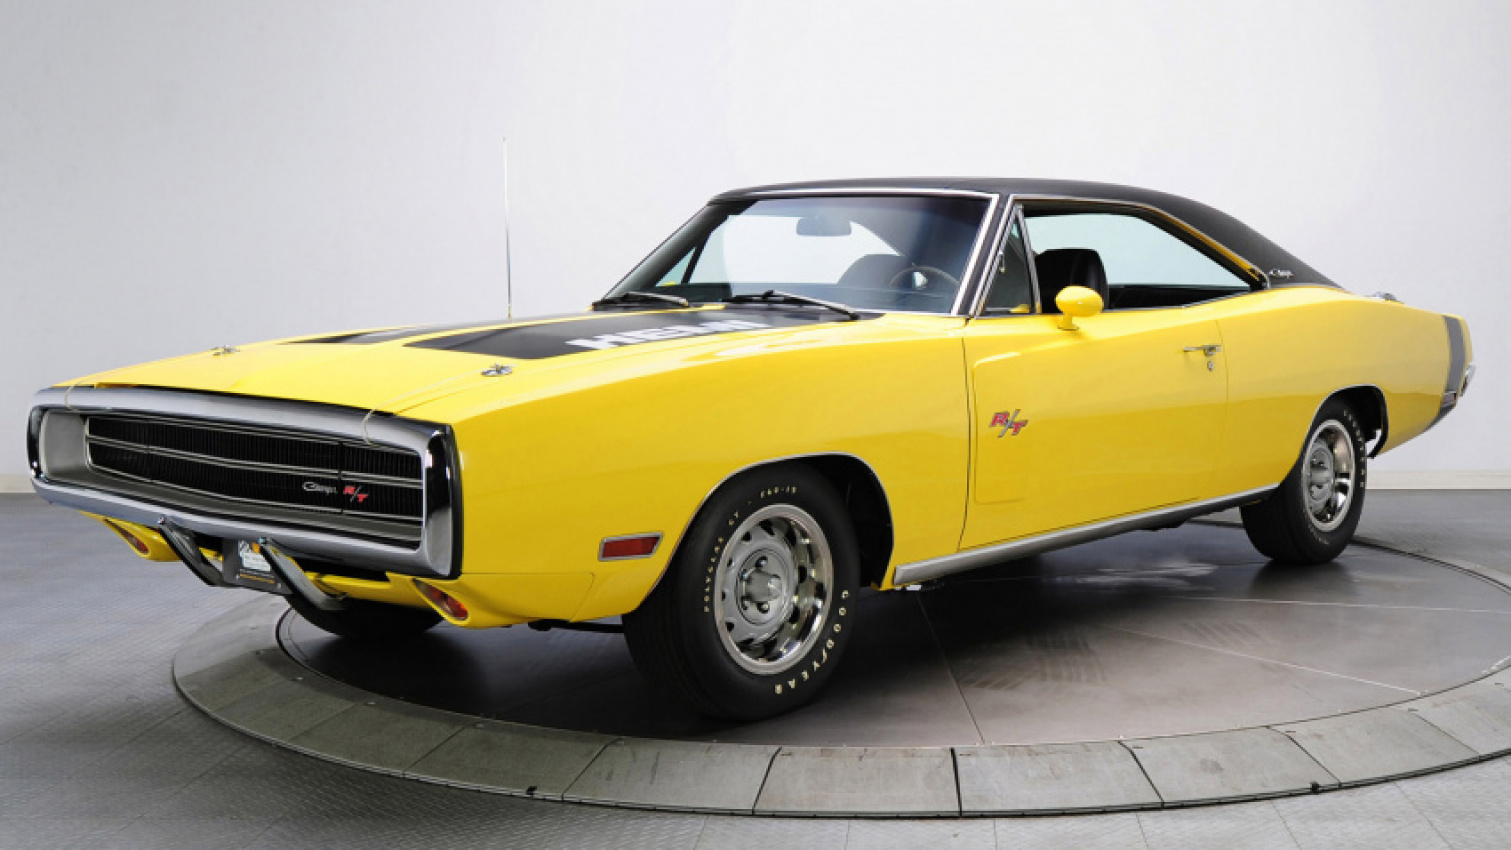 autos, cars, classic cars, dodge, 1970 dodge charger r/t 426 hemi, dodge charger, vnex, 1970 dodge charger r/t 426 hemi